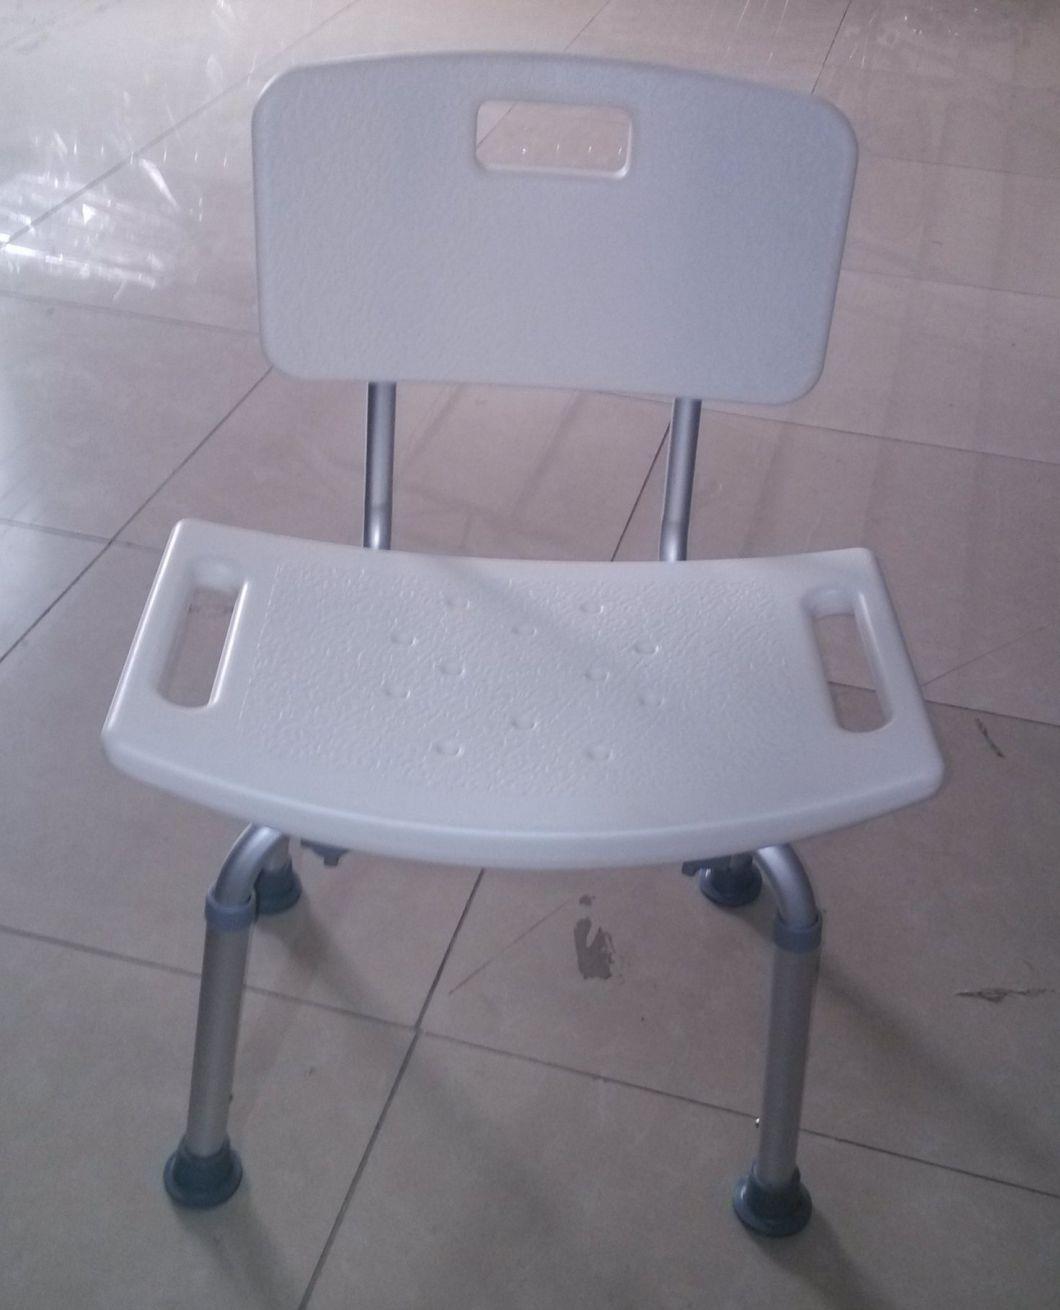 Commode Chair - Bath Seat with Back Shower Chair White